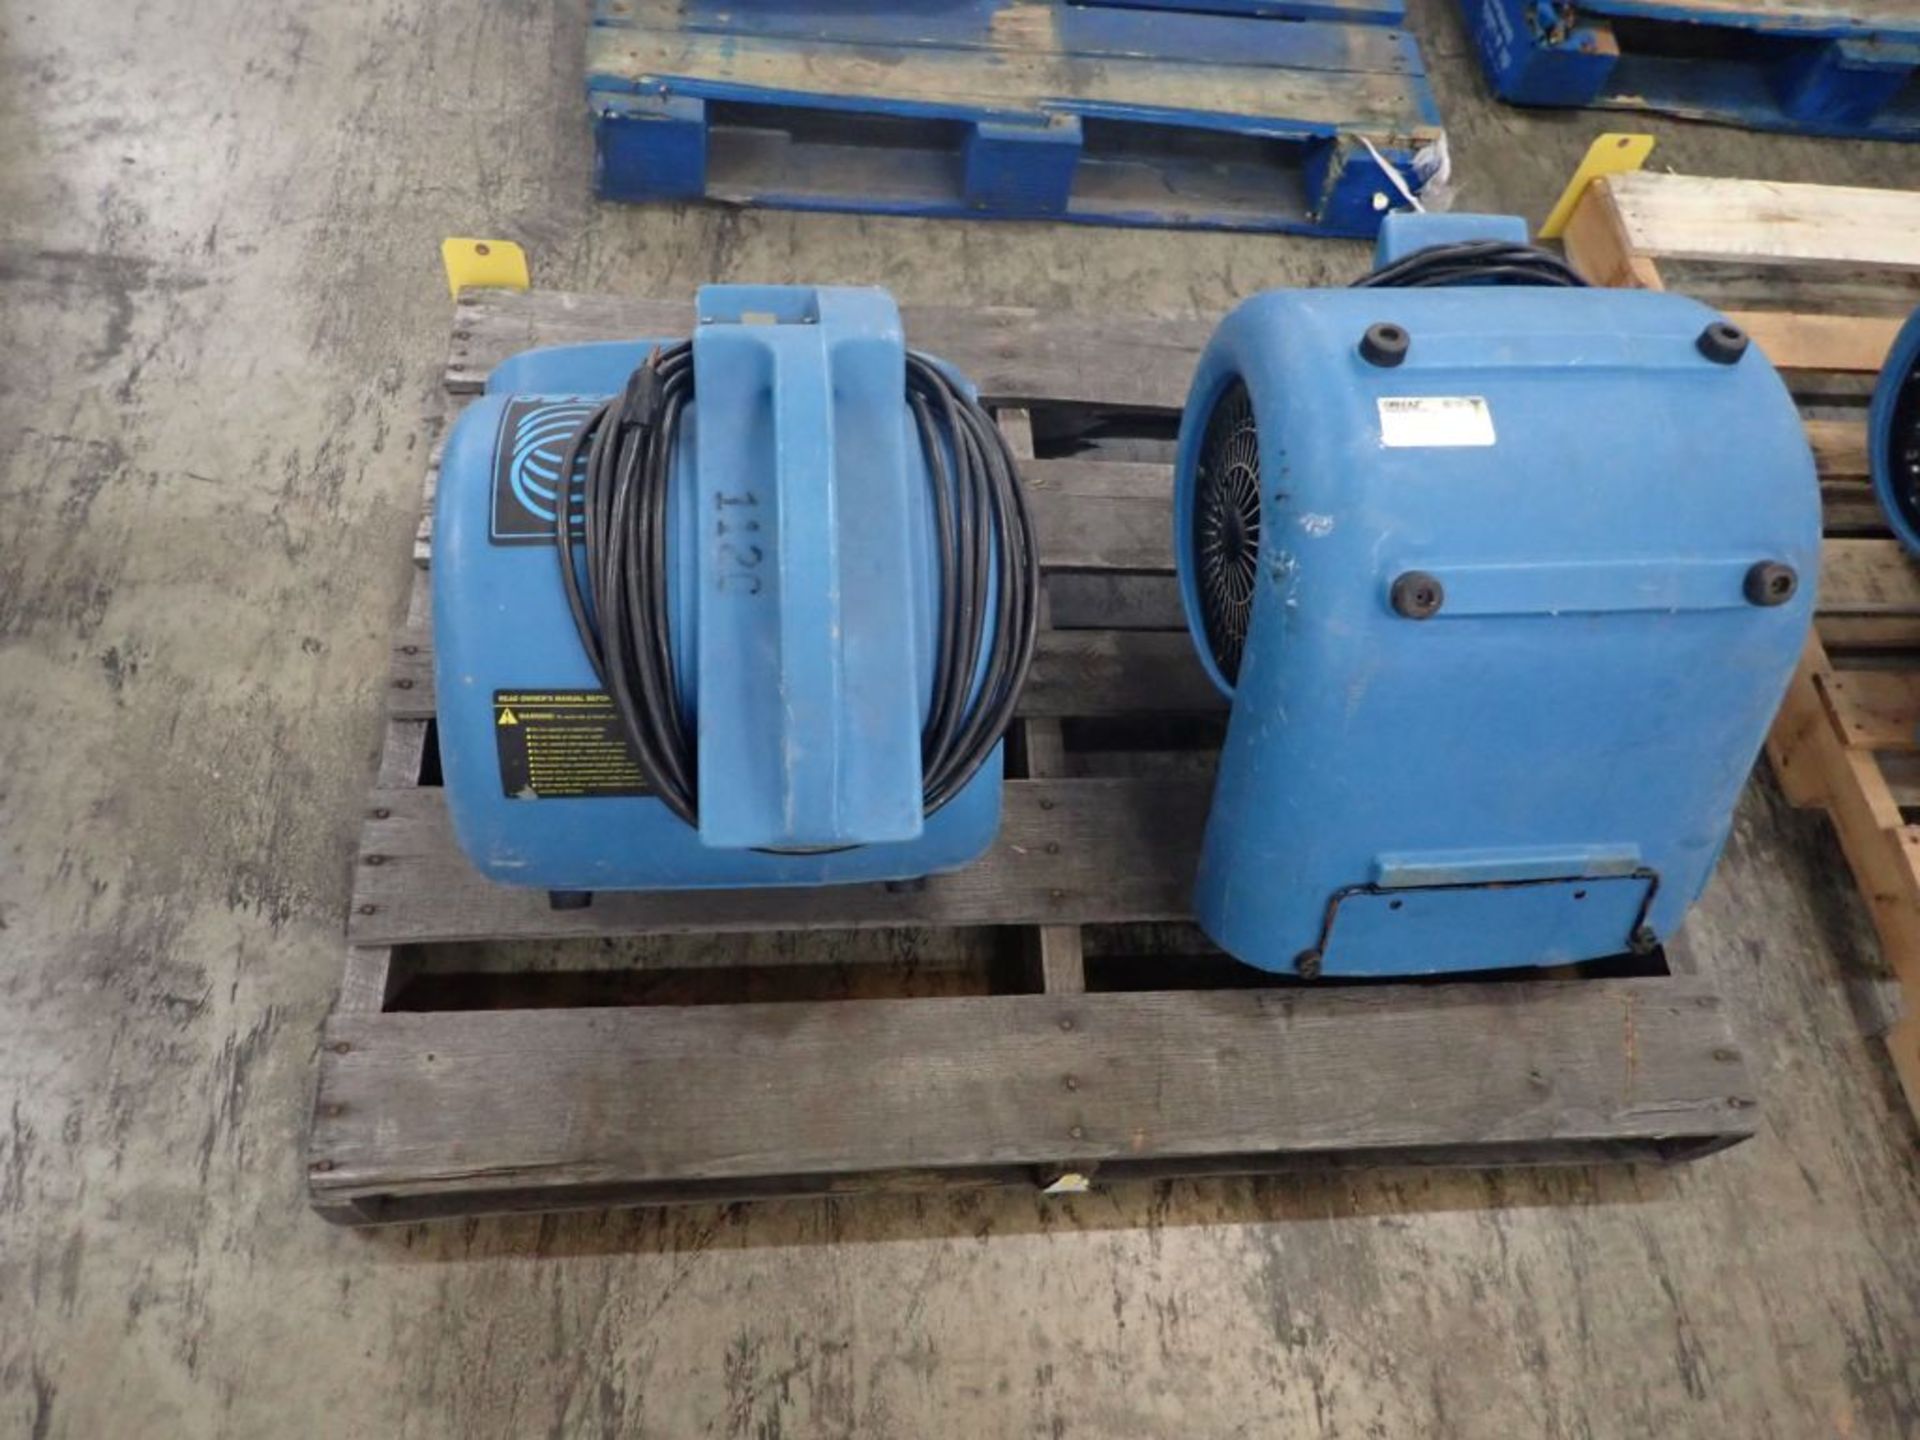 Lot of (2) Drieaze Turbo Dryers - Image 4 of 12